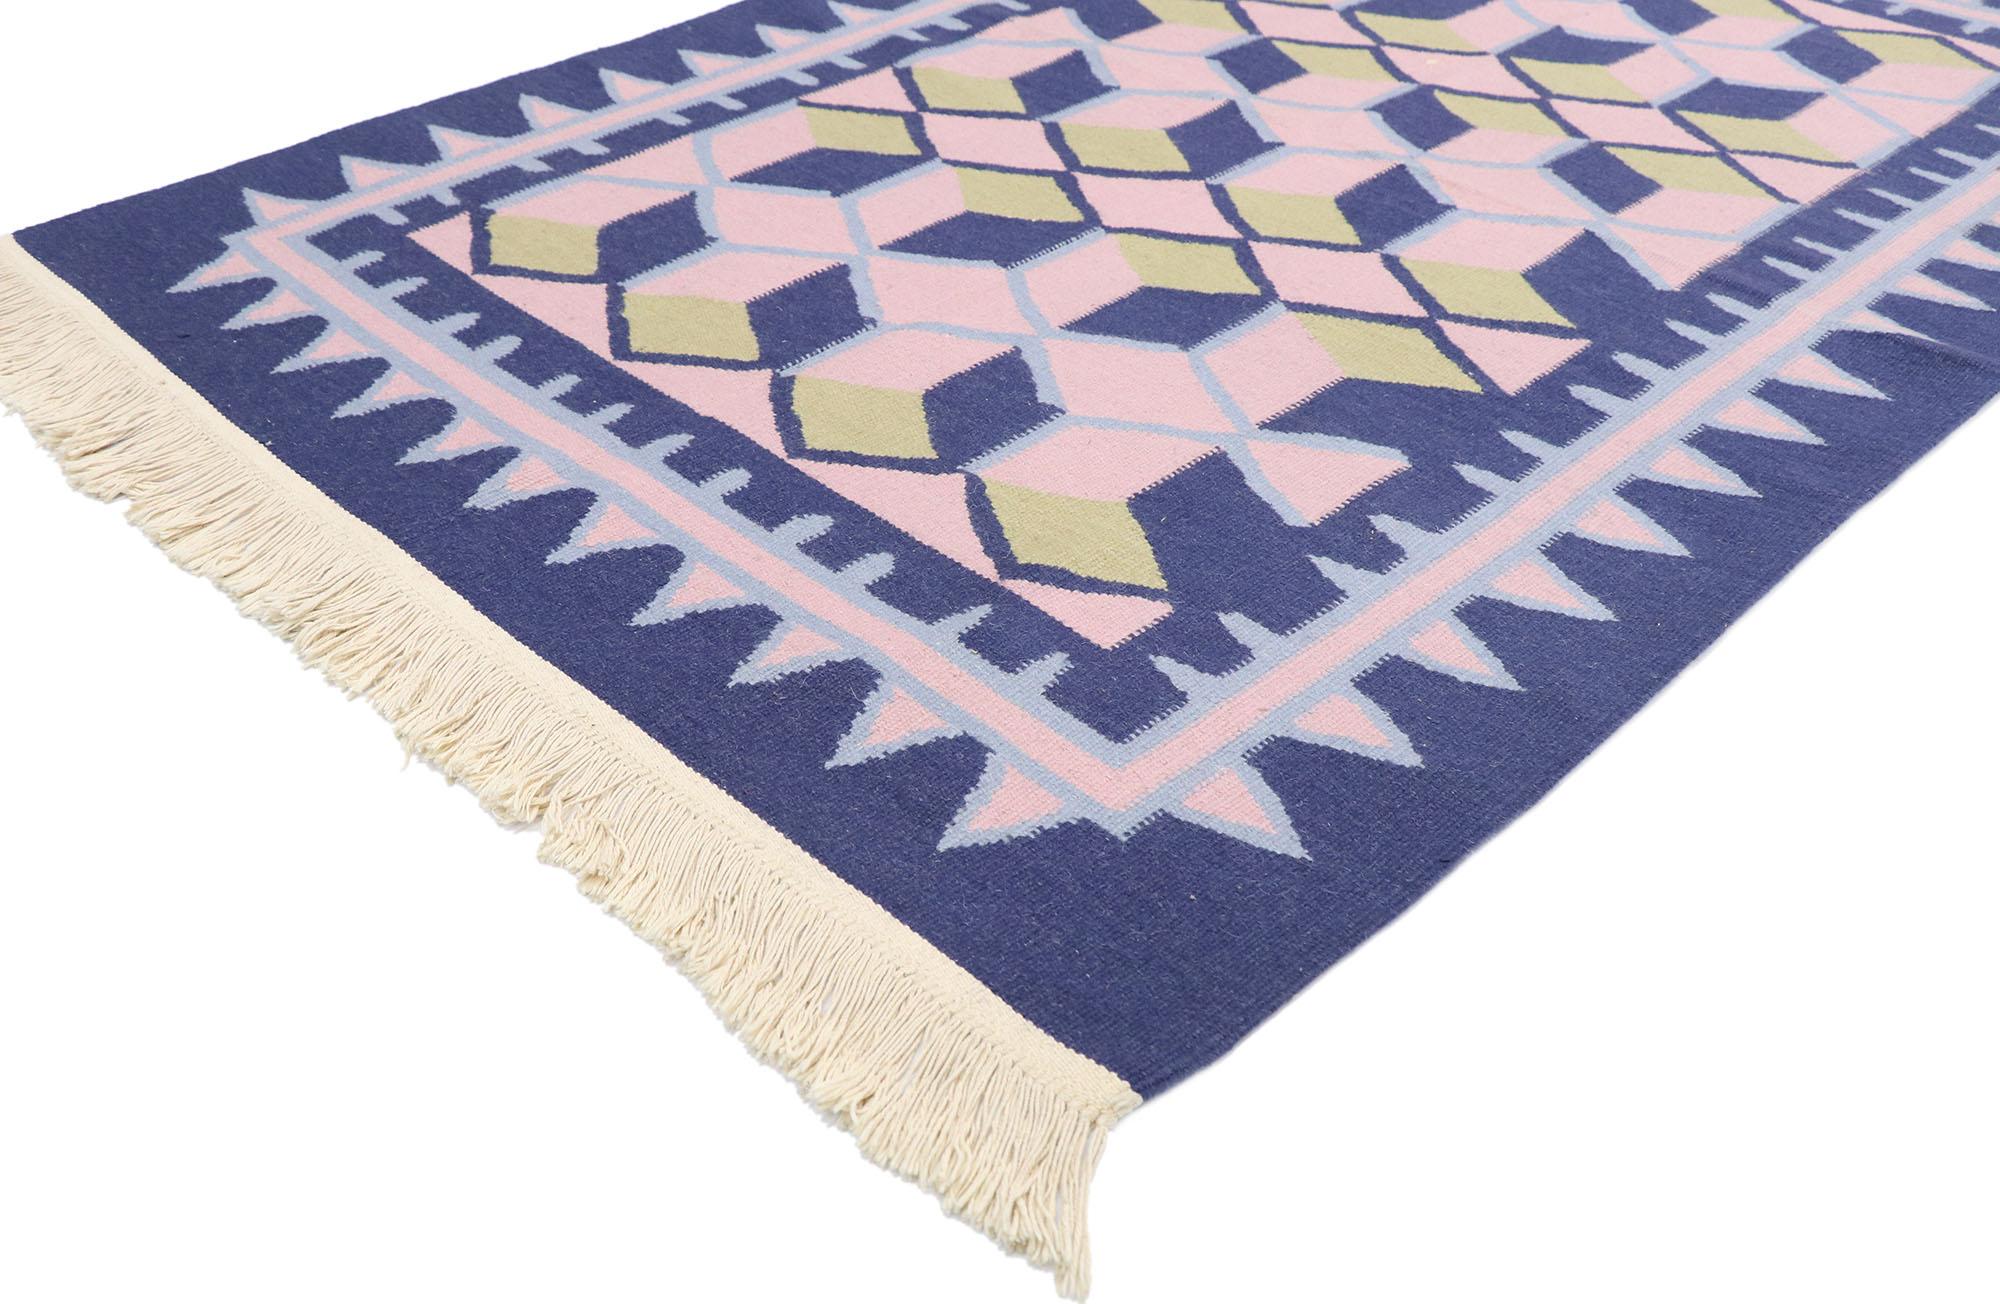 77812 vintage Chinese Geometric Kilim rug with Postmodern Cubist style 04'01 x 06'03. This hand-woven wool vintage Chinese kilim rug features an all-over lattice pattern spread across an abrashed field. Pink and blue parallelograms form a trellis